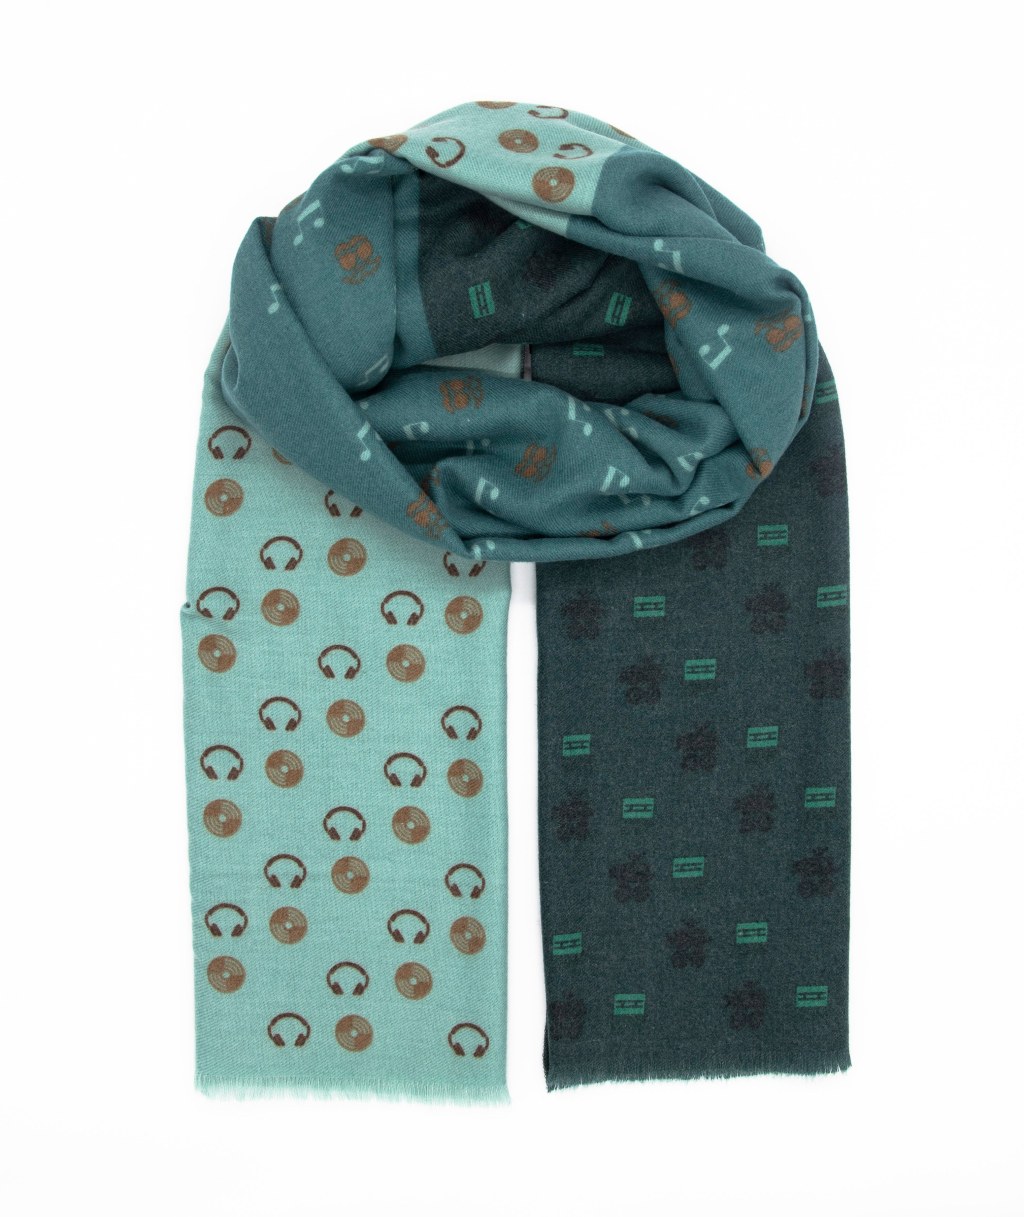 Picture of: Unisex Scarf  Music Pattern  Green Scarf  Vegan Brand  Scarf